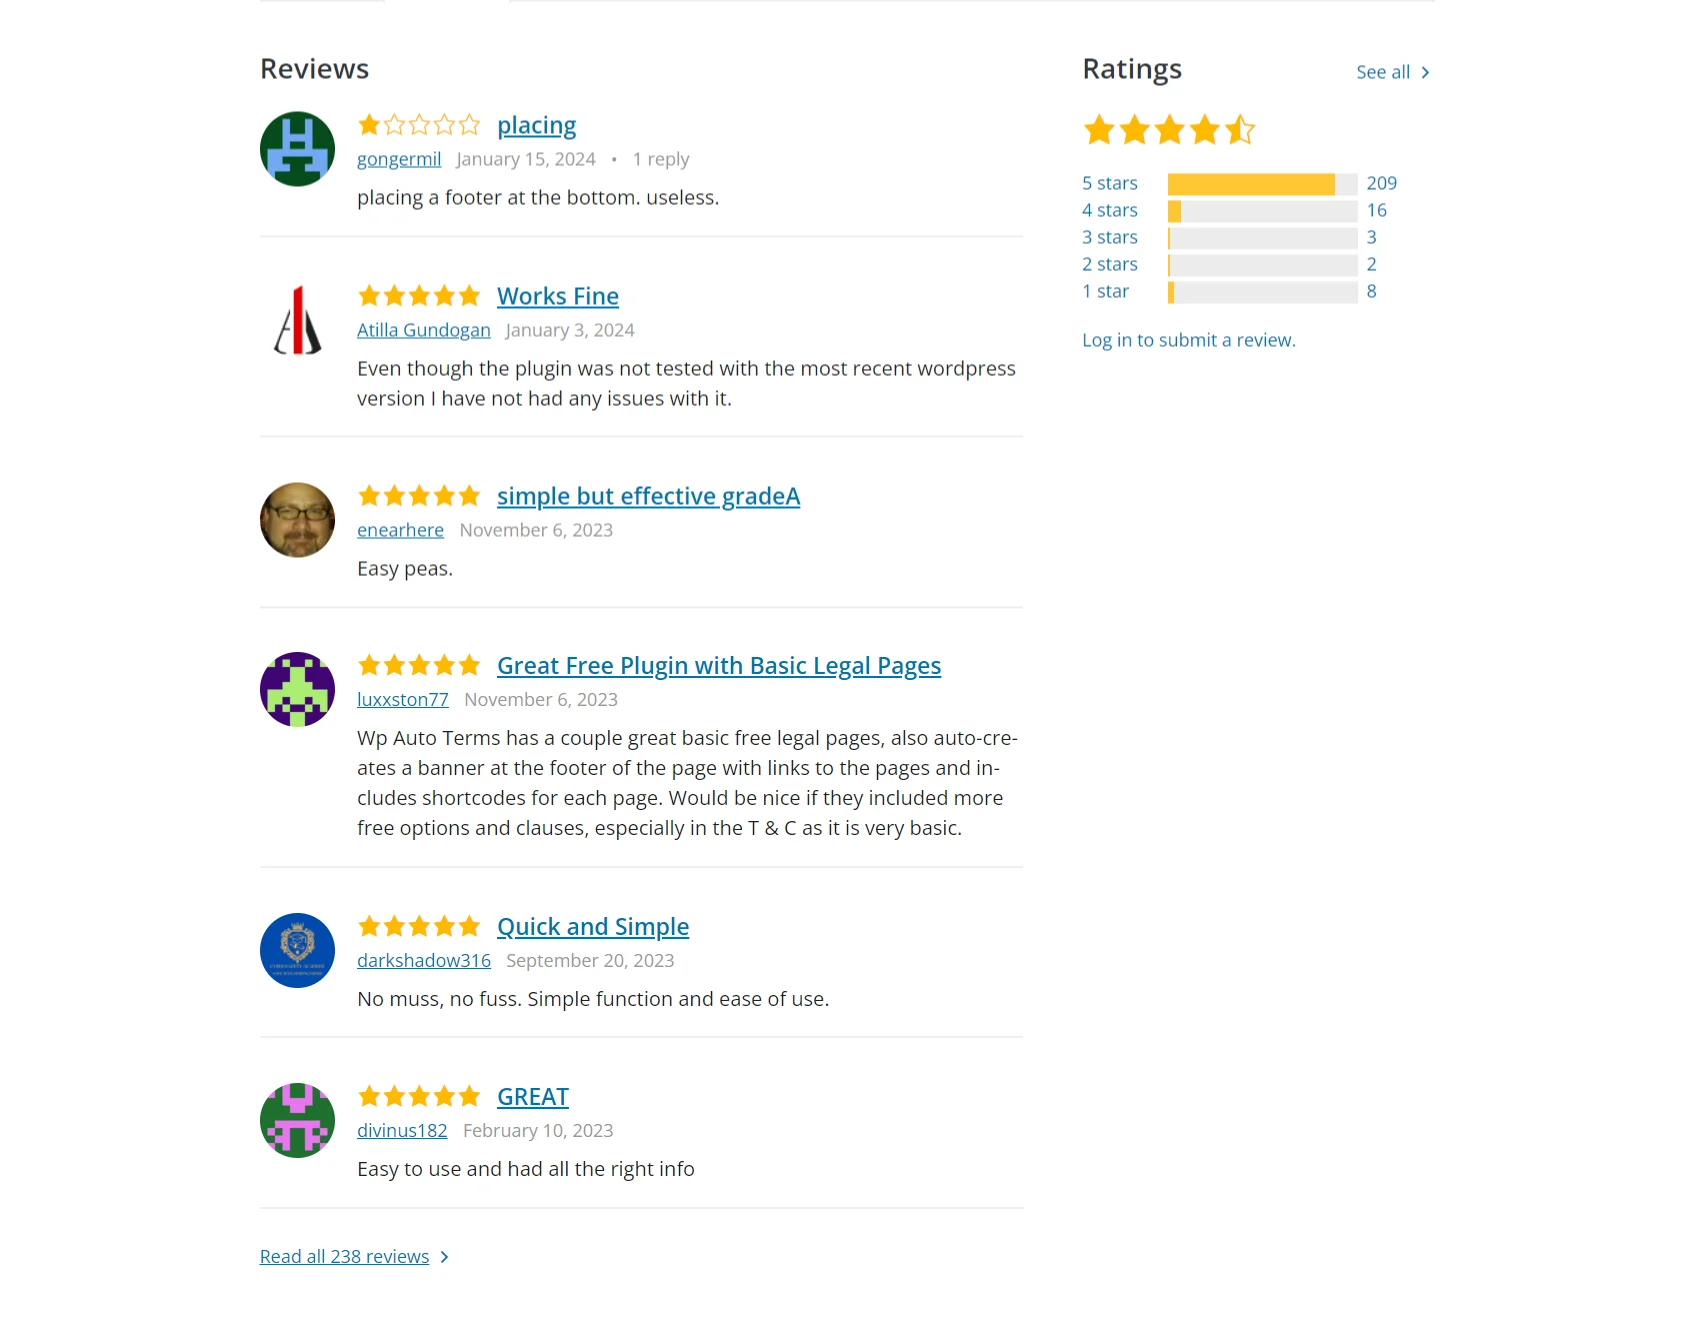 Review and ratings of WP AutoTerms